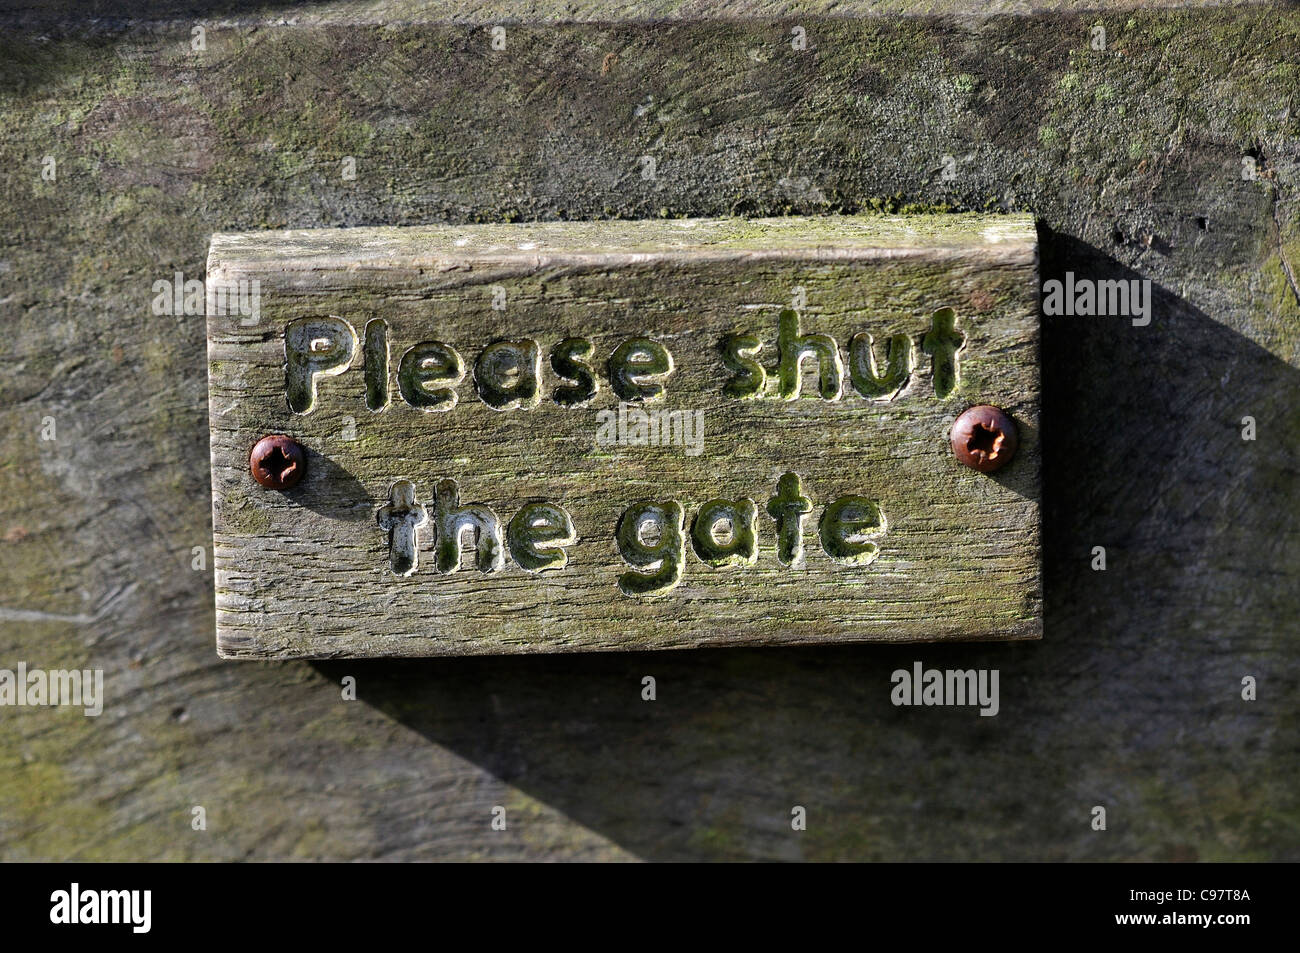 A sign asking people to shut the gate carved in wood UK Stock Photo